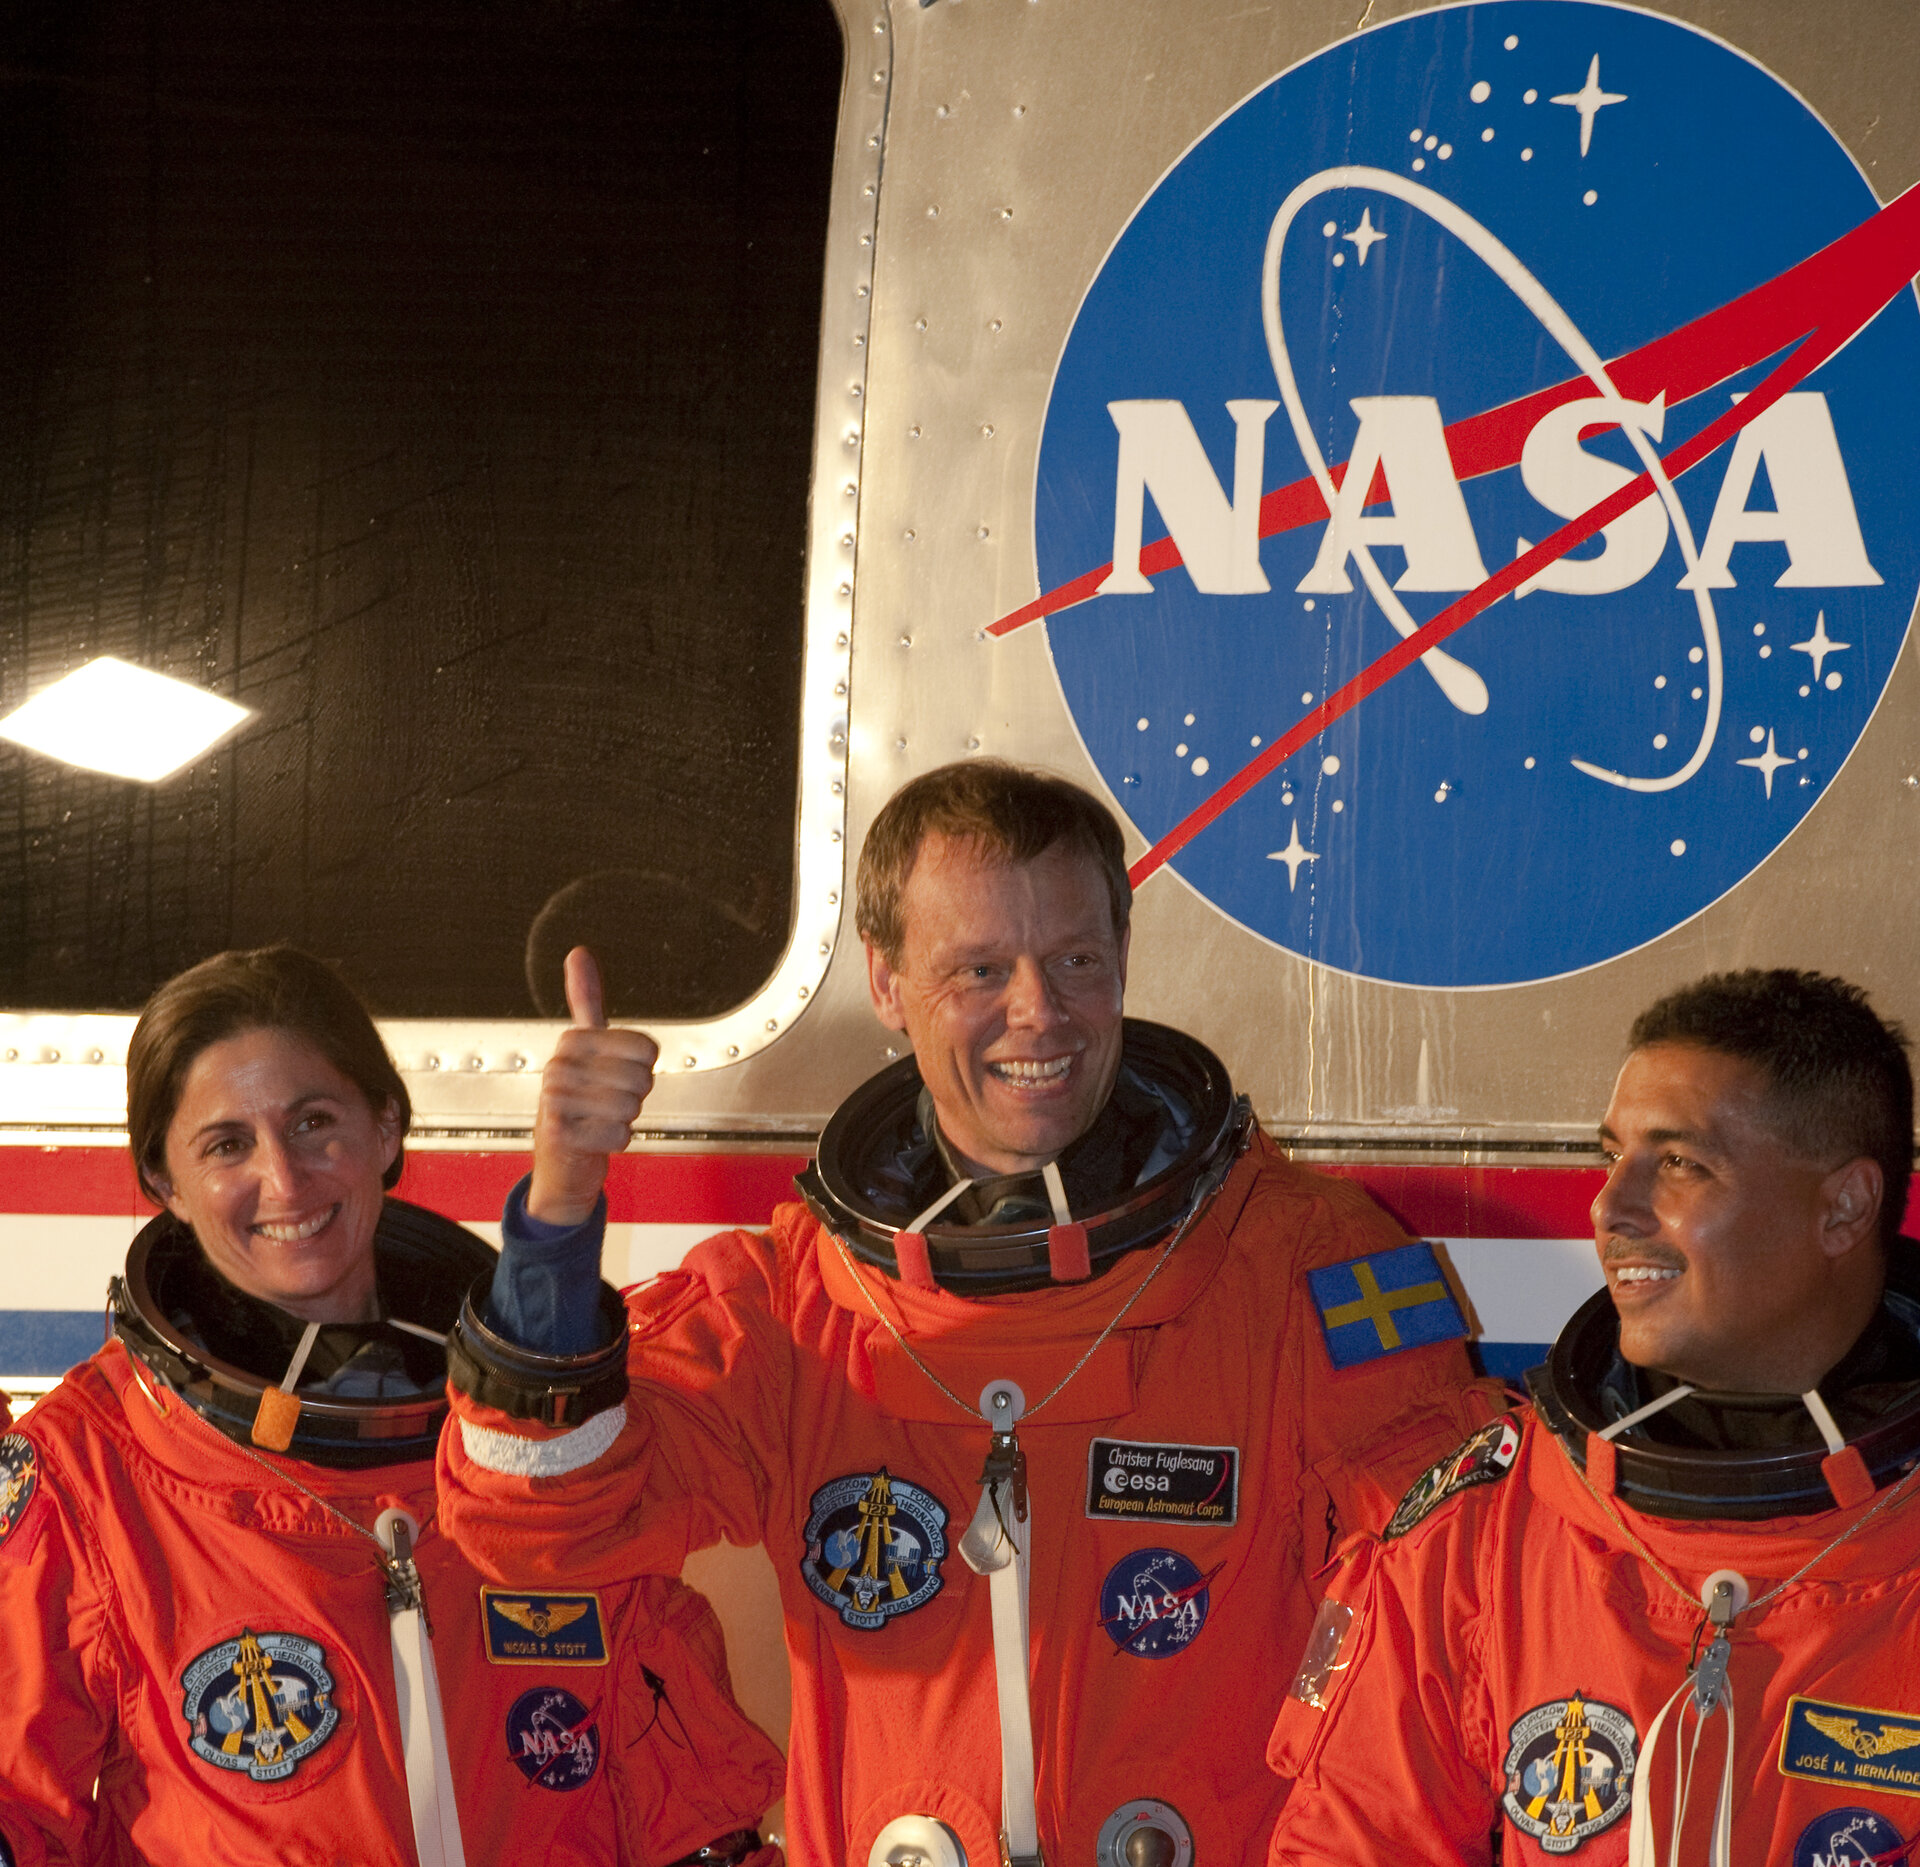 Christer Fuglesang and the STS-128 mission crew during walkout